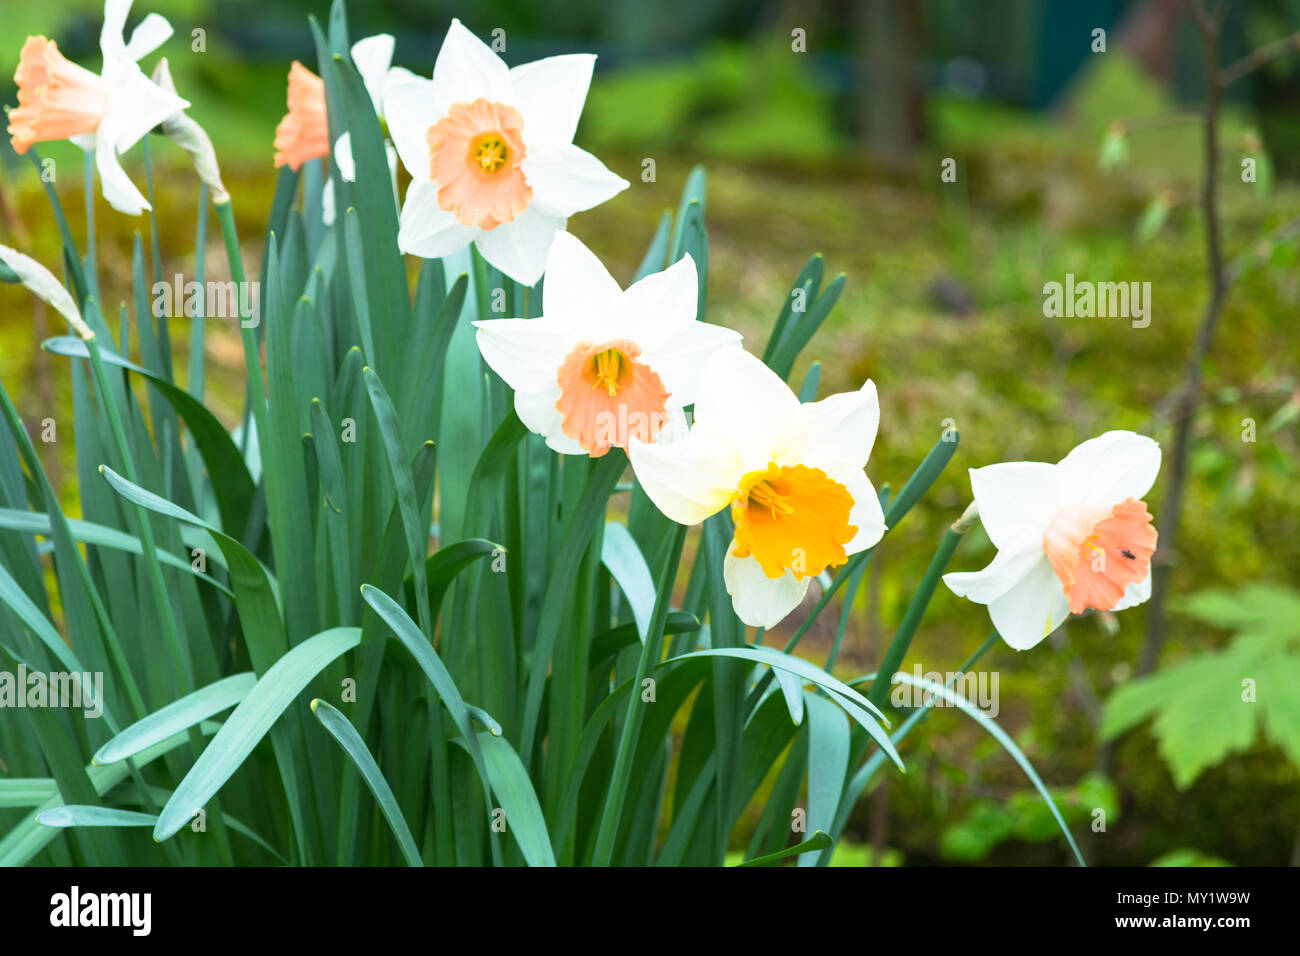 Daffodil, on a green meadow, flowers in spring Stock Photo